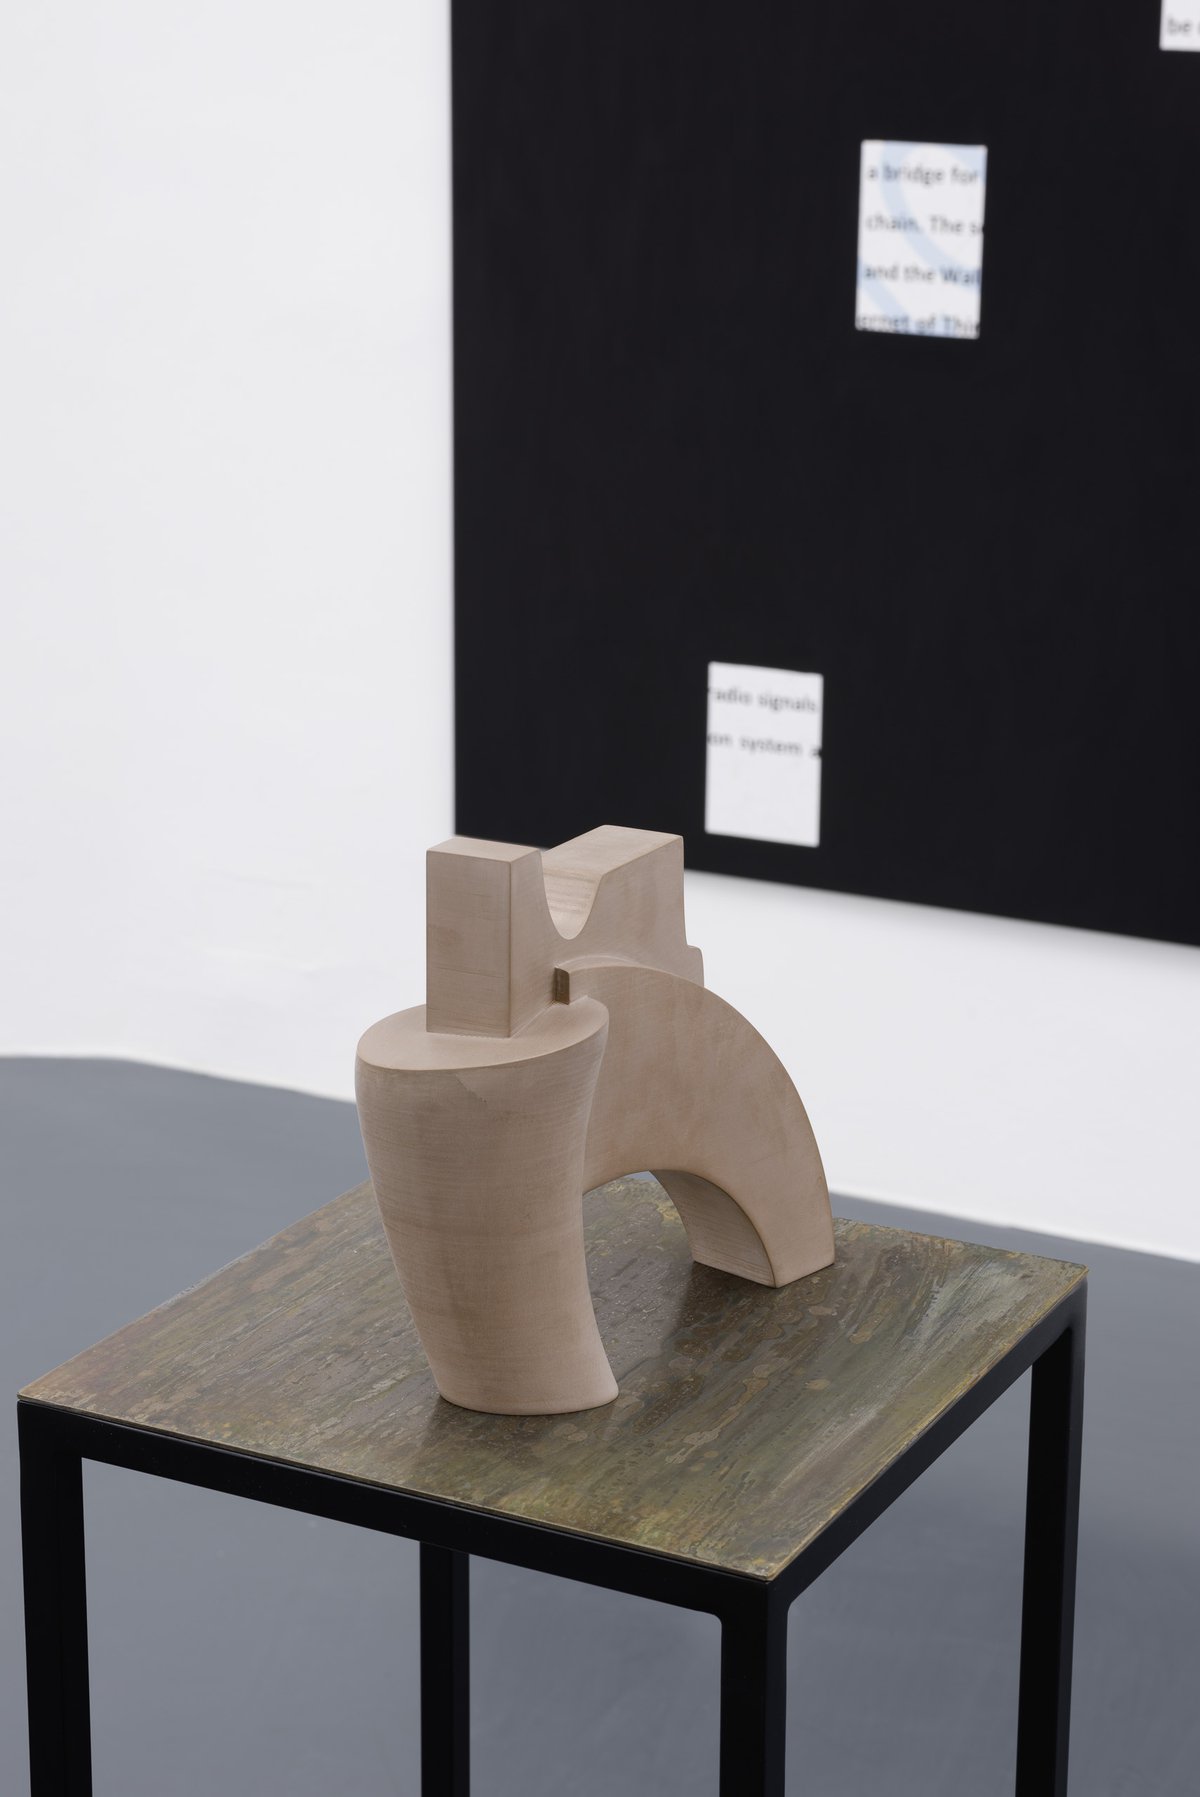 Andy BootSmart Sculpture (three)3D printed plastic and bronze composite23.6 x 25.5 x 12.7 cm